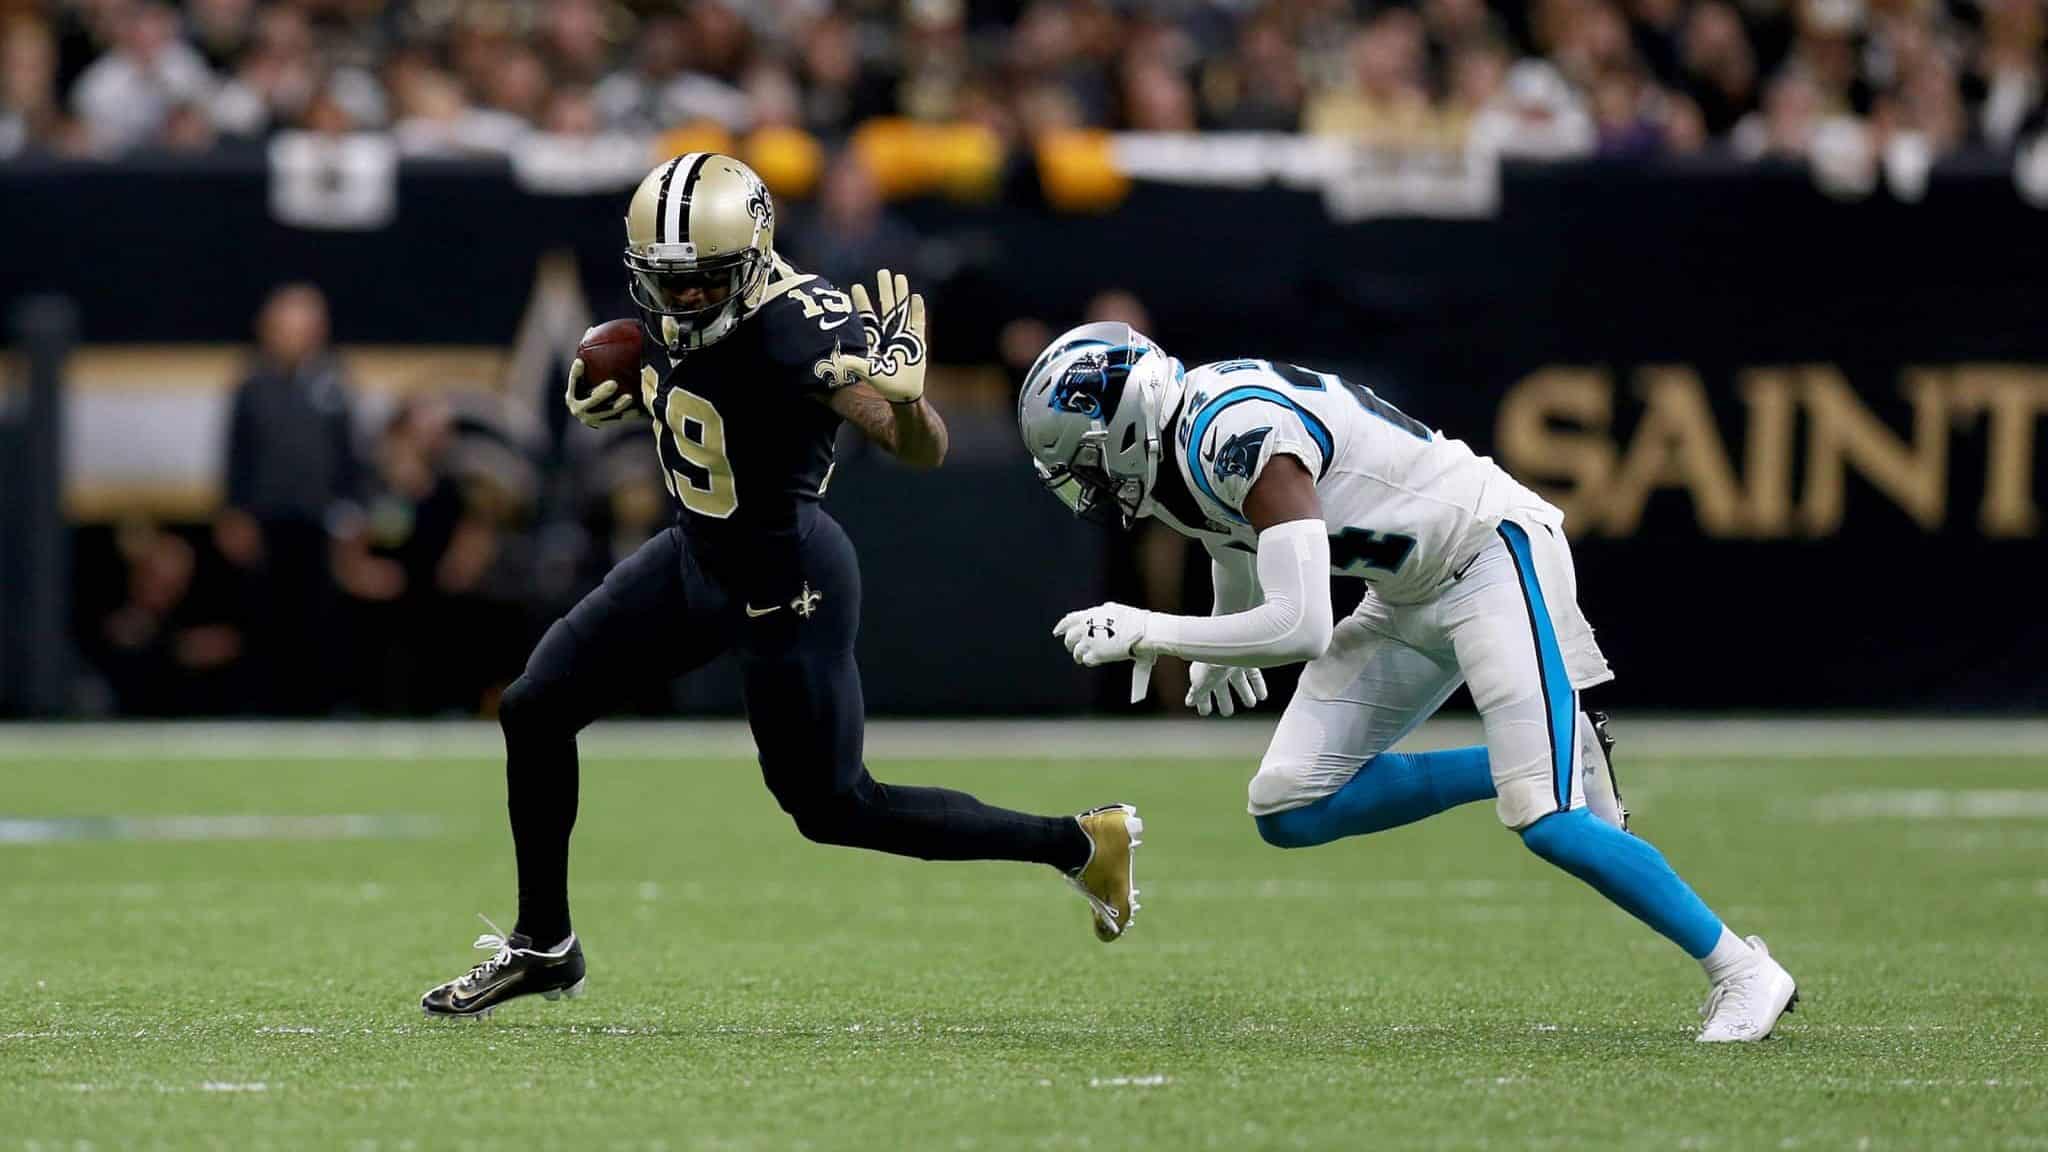 NEW ORLEANS, LOUISIANA - NOVEMBER 24: Ted Ginn #19 of the New Orleans Saints breaks a tackle against James Bradberry #24 of the Carolina Panthers during the first quarter in the game at Mercedes Benz Superdome on November 24, 2019 in New Orleans, Louisiana.